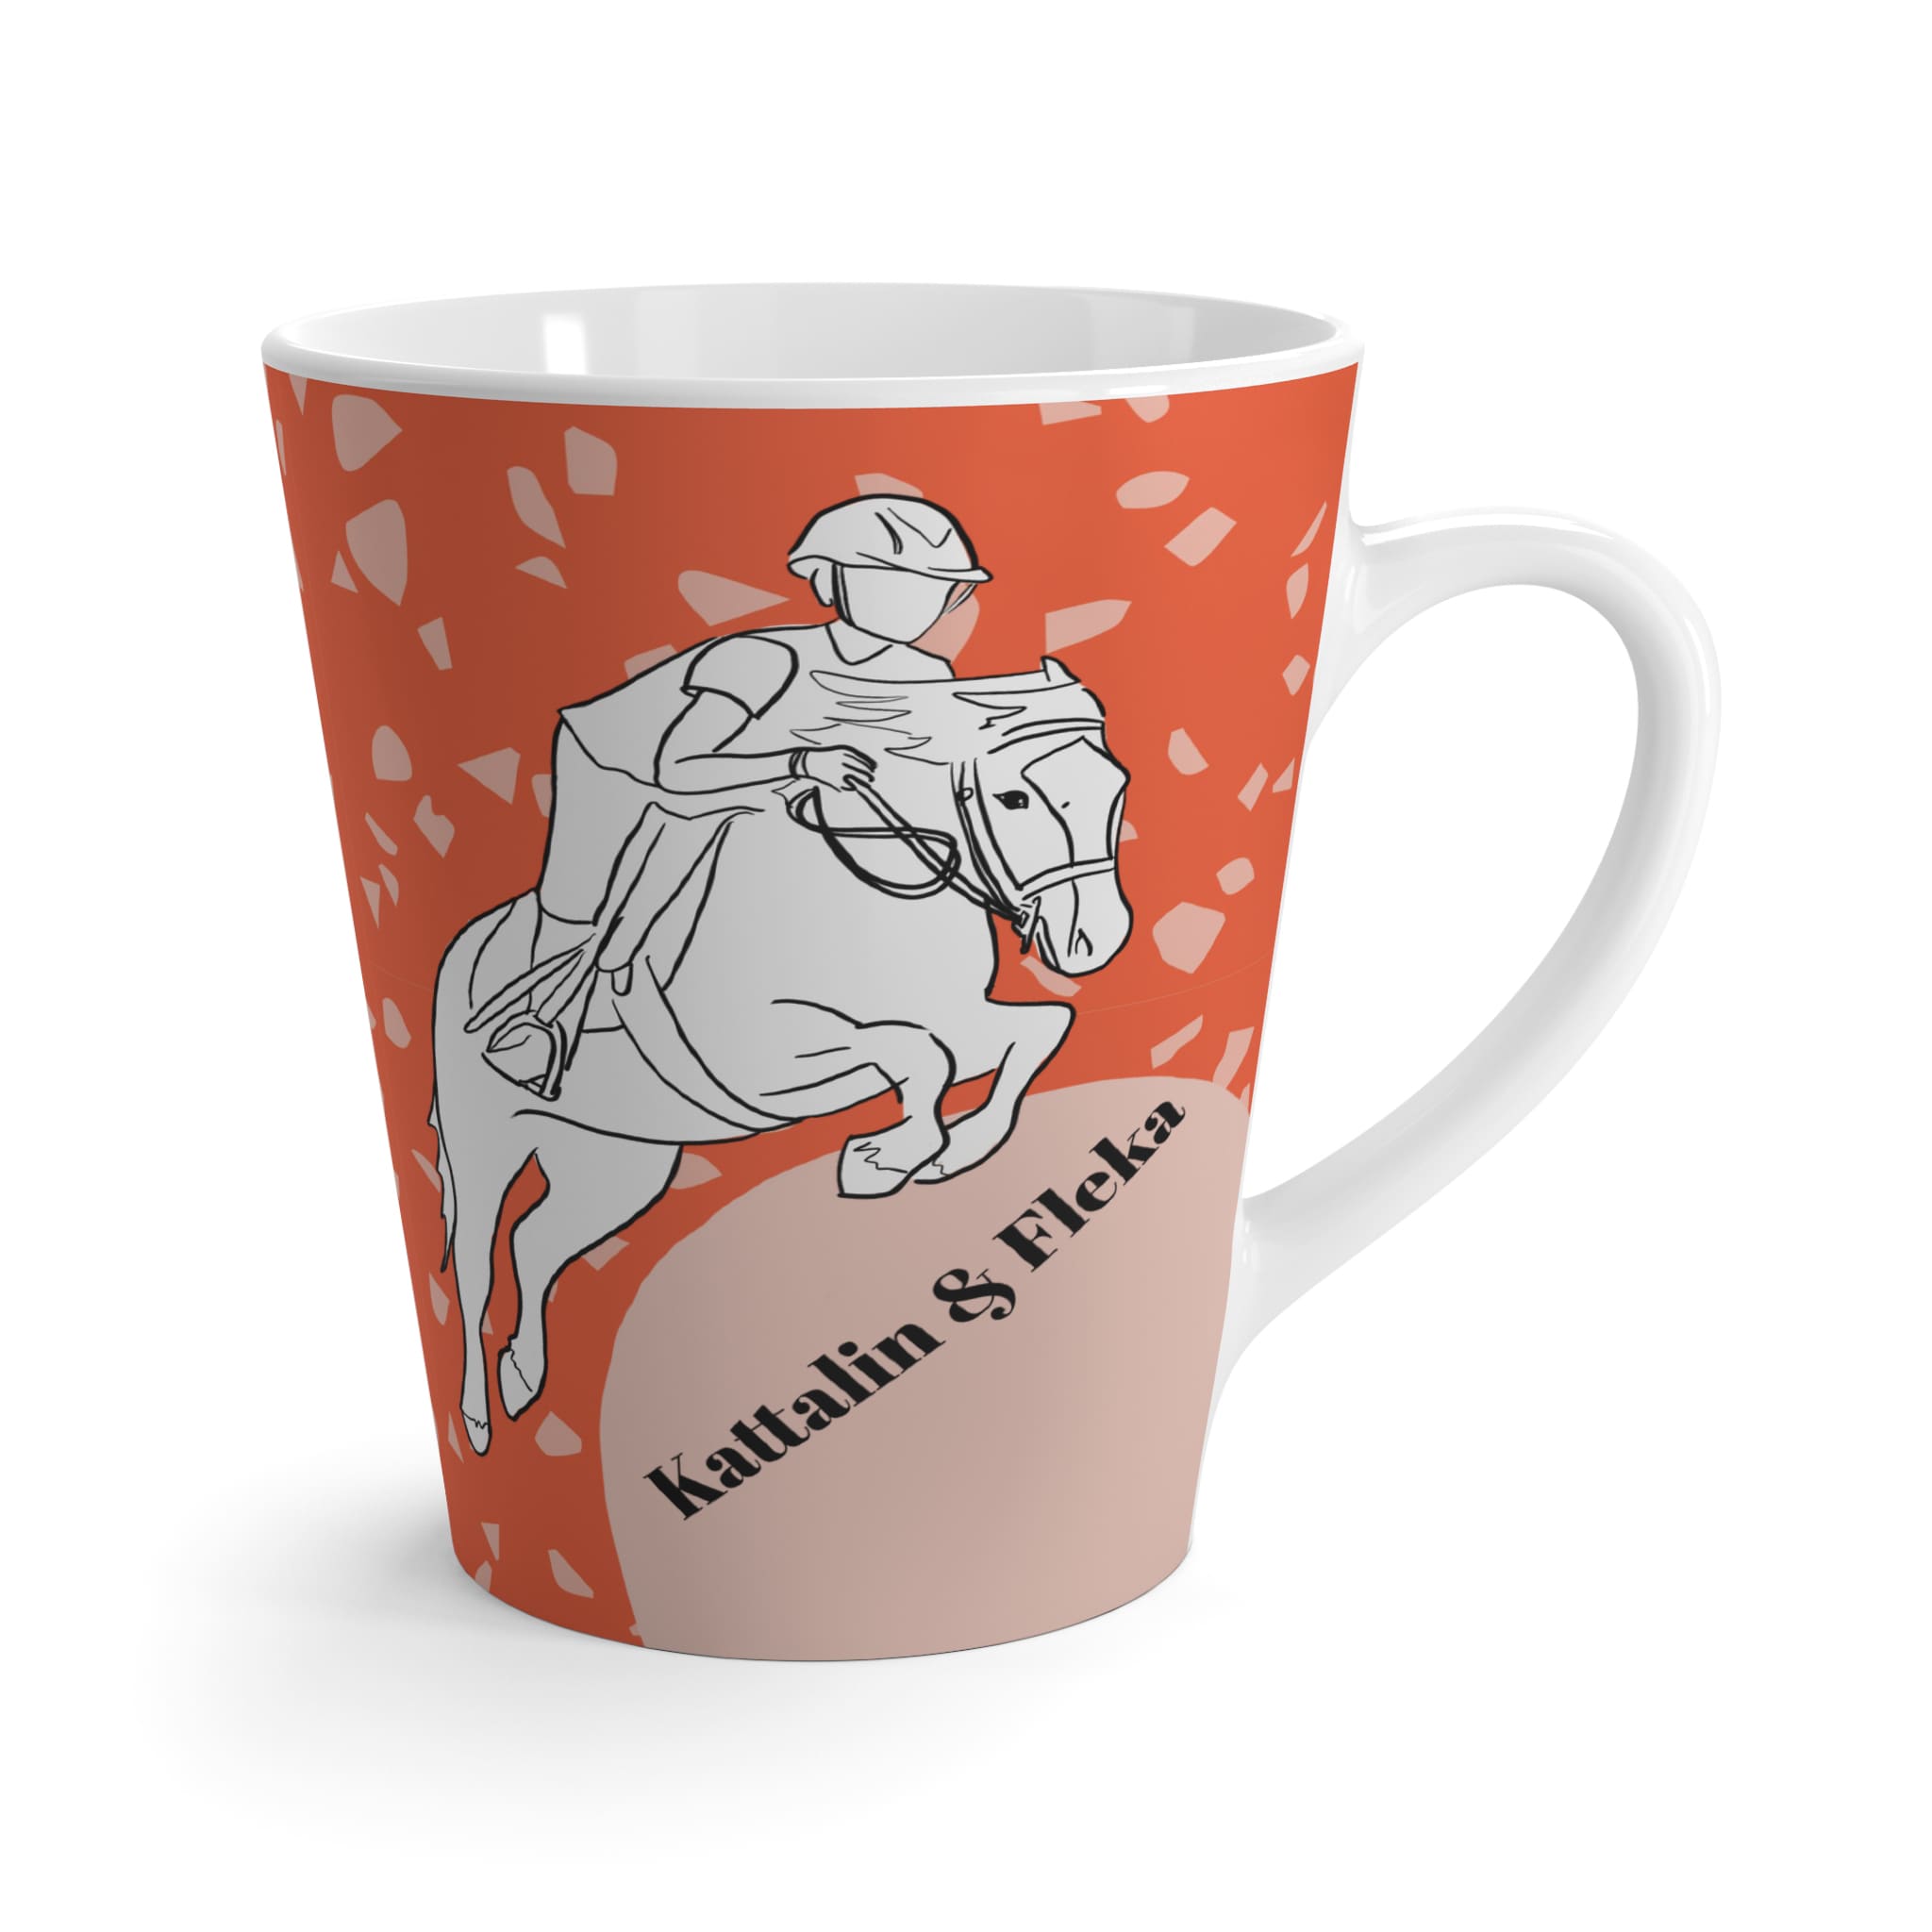 colorful custom line art illustration for horse girls on a mug illustrating her show jumping with bright terrazzo patterned background